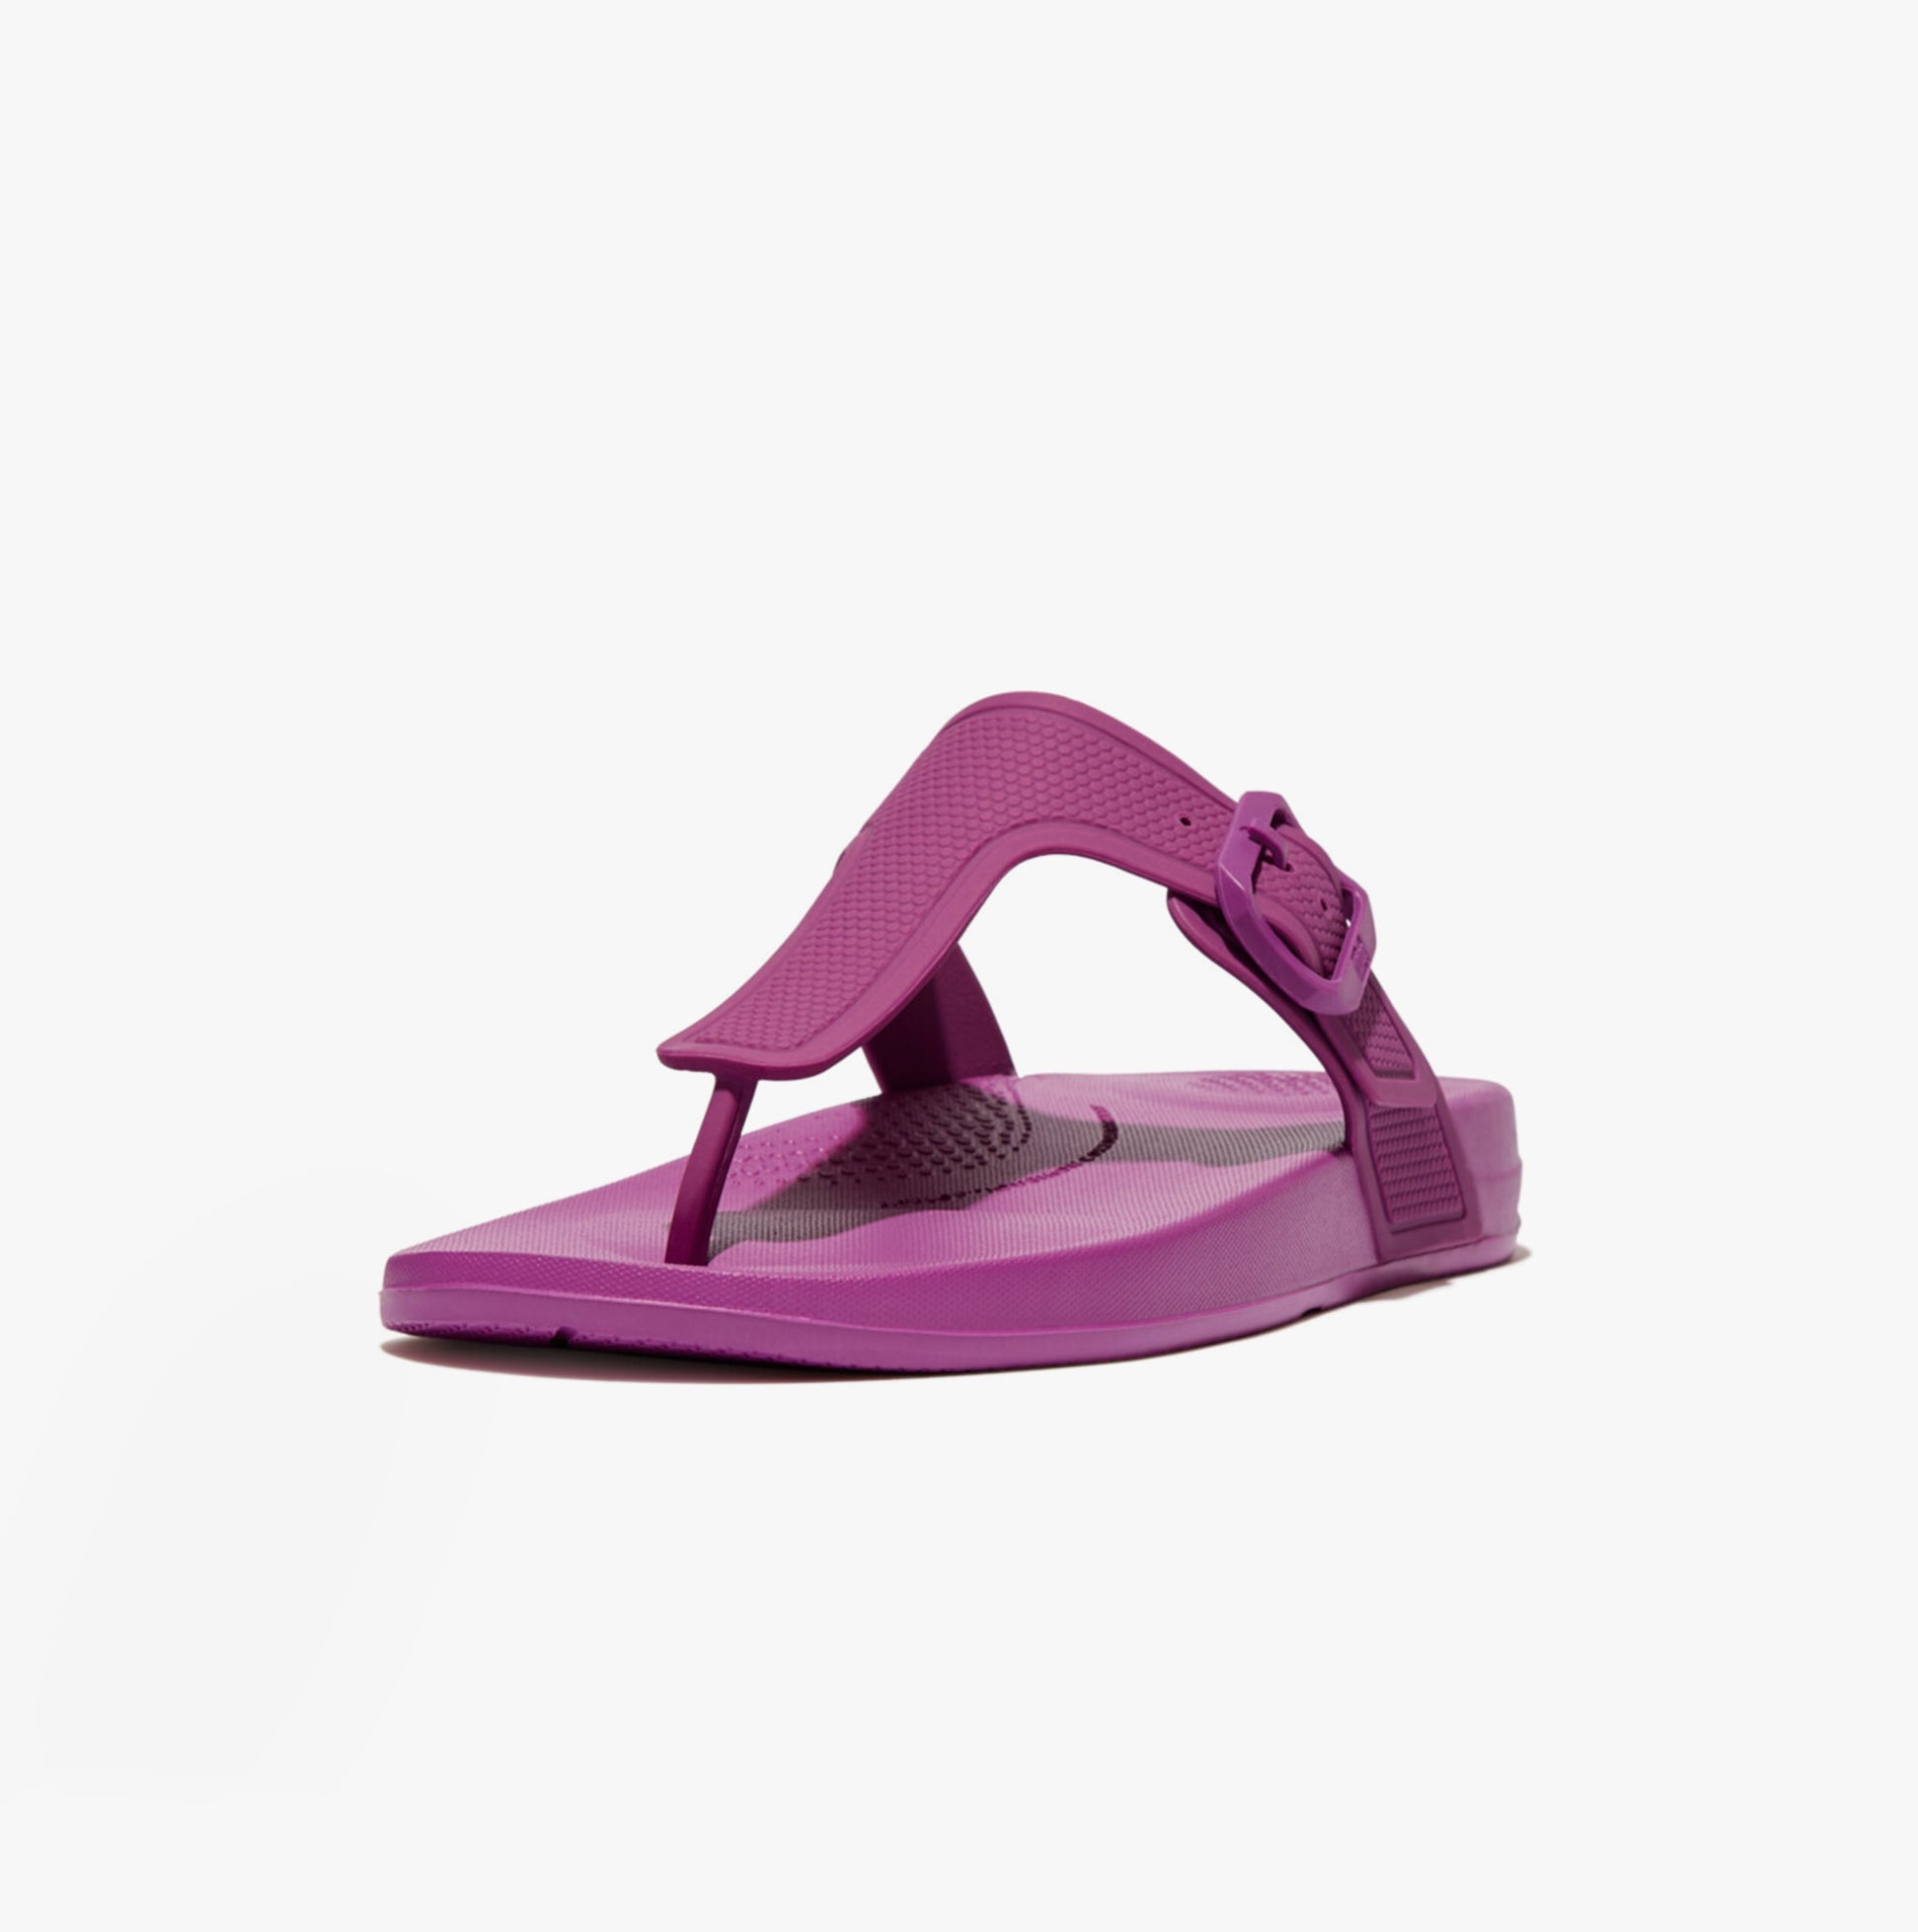 FitFlop-[GB3-A29]-MiamiViolet-4.jpg